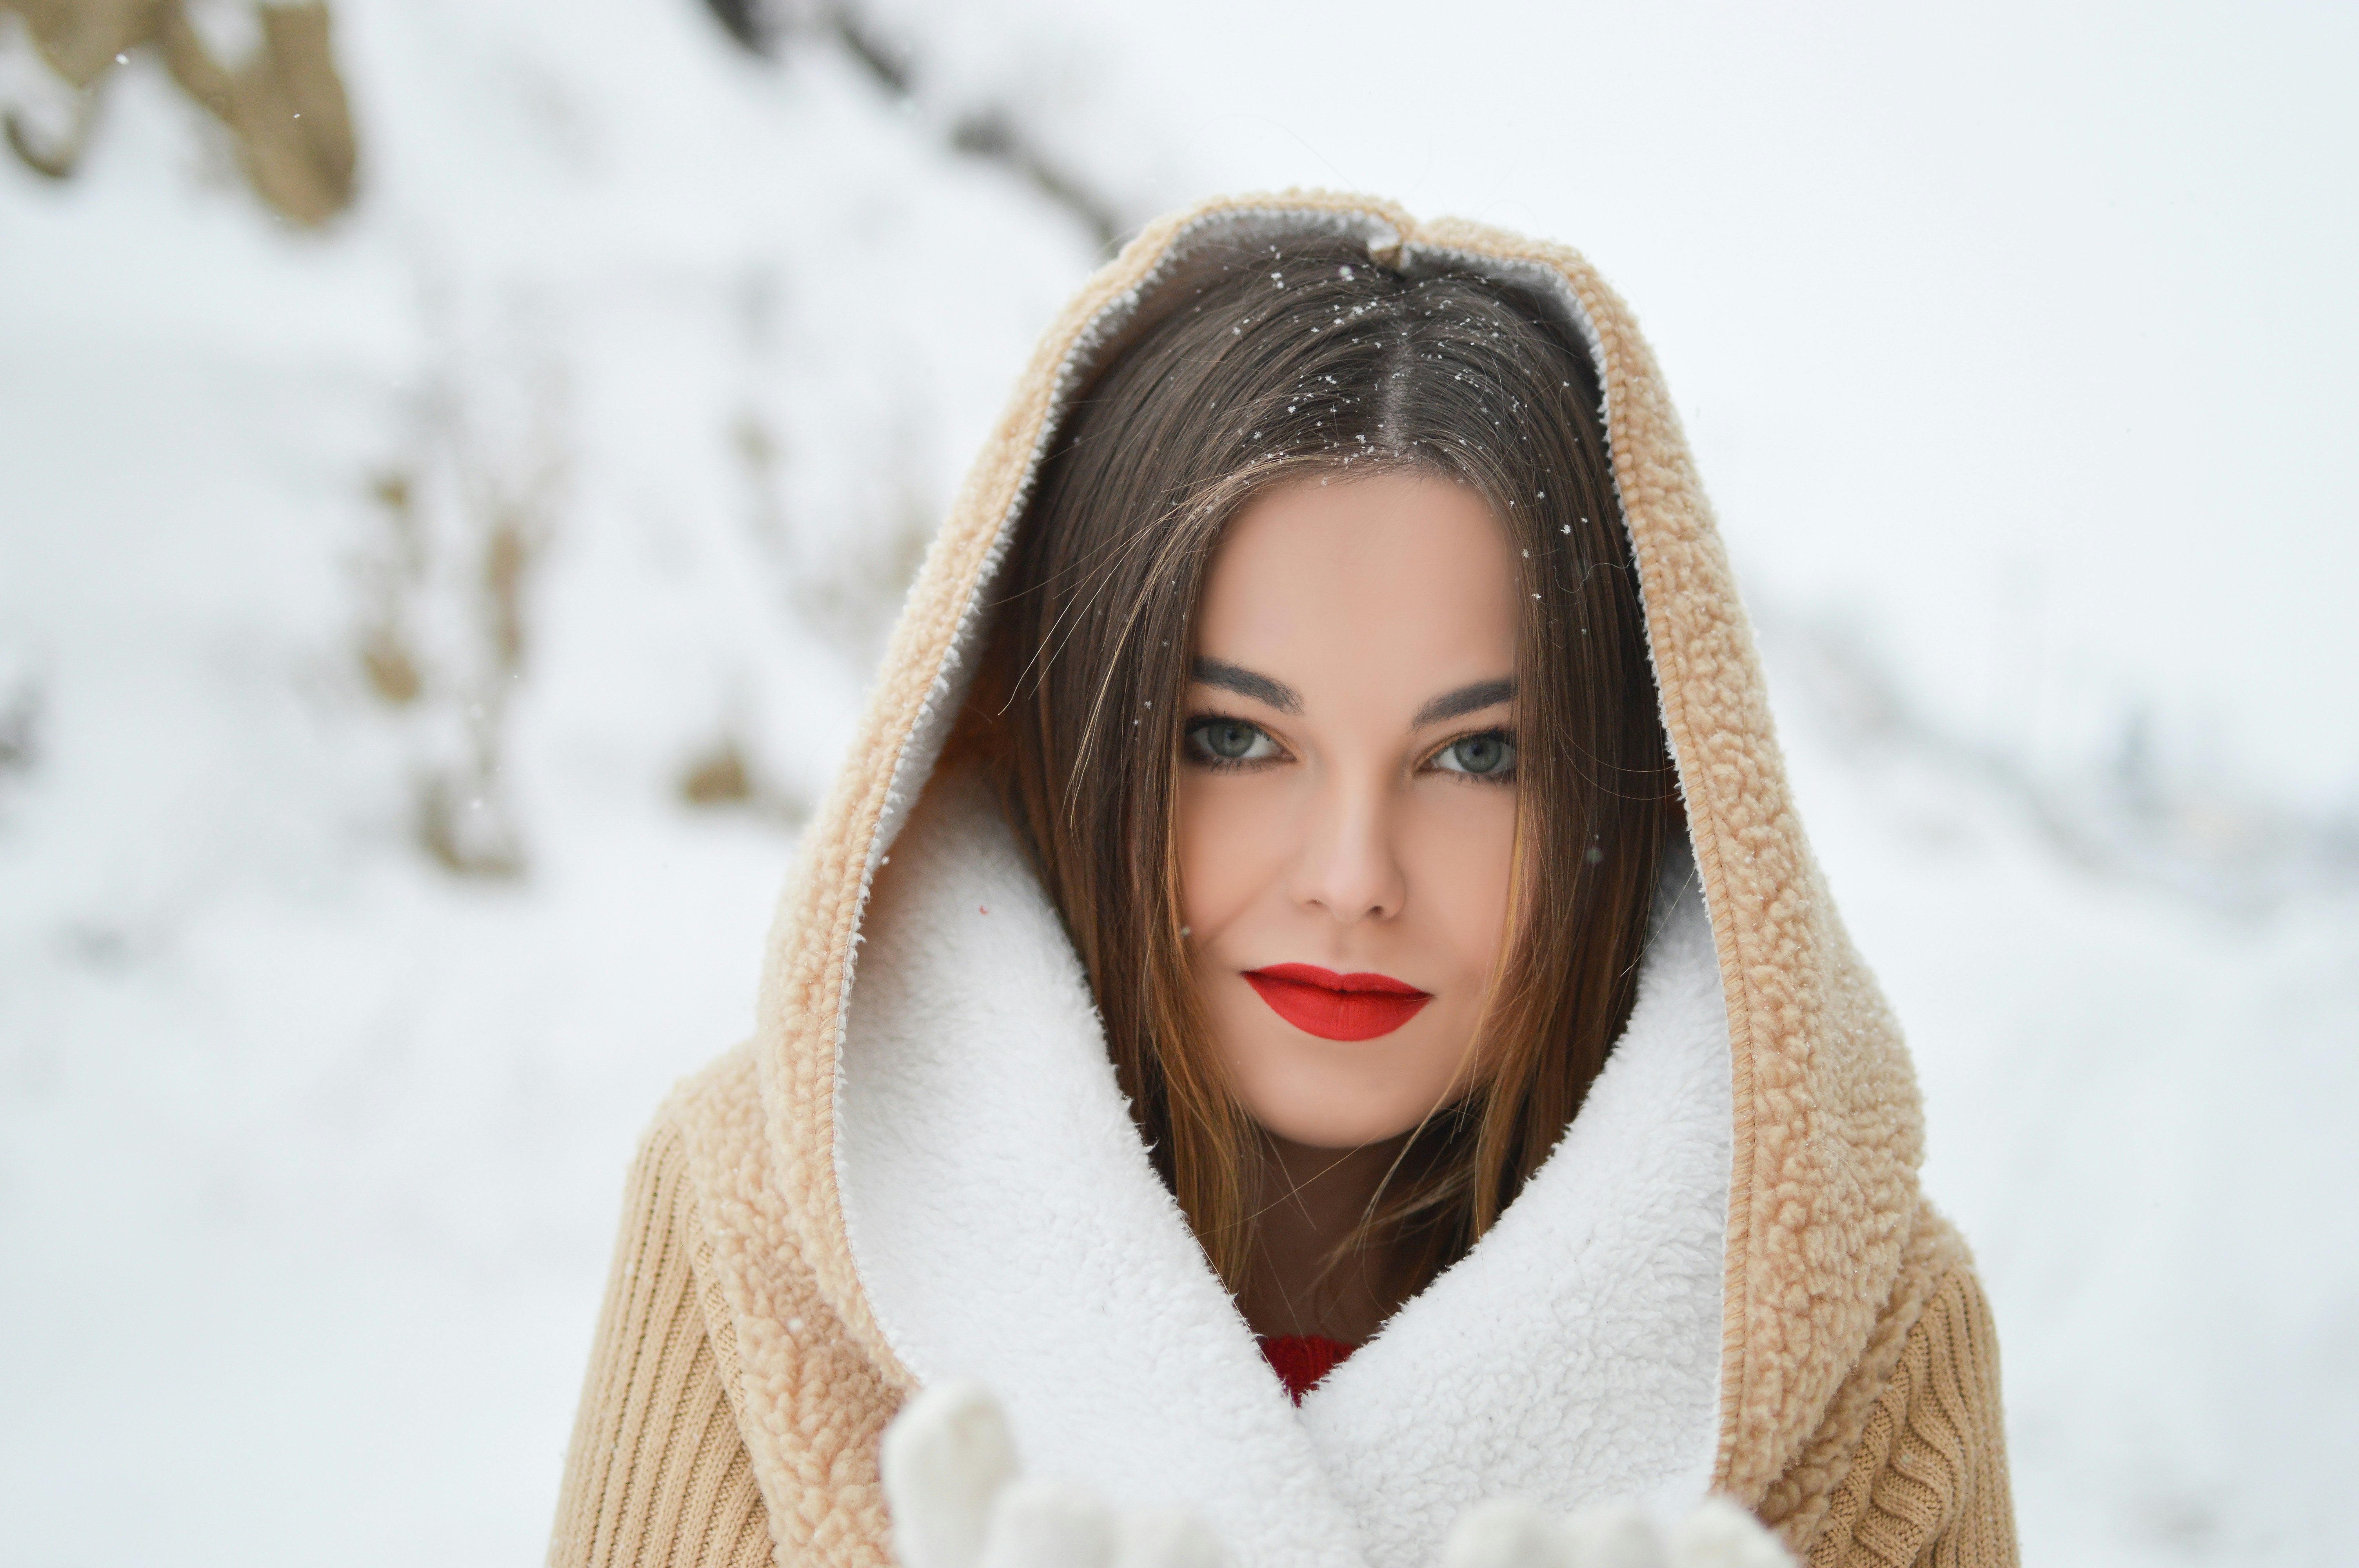 Hooded woman in snow